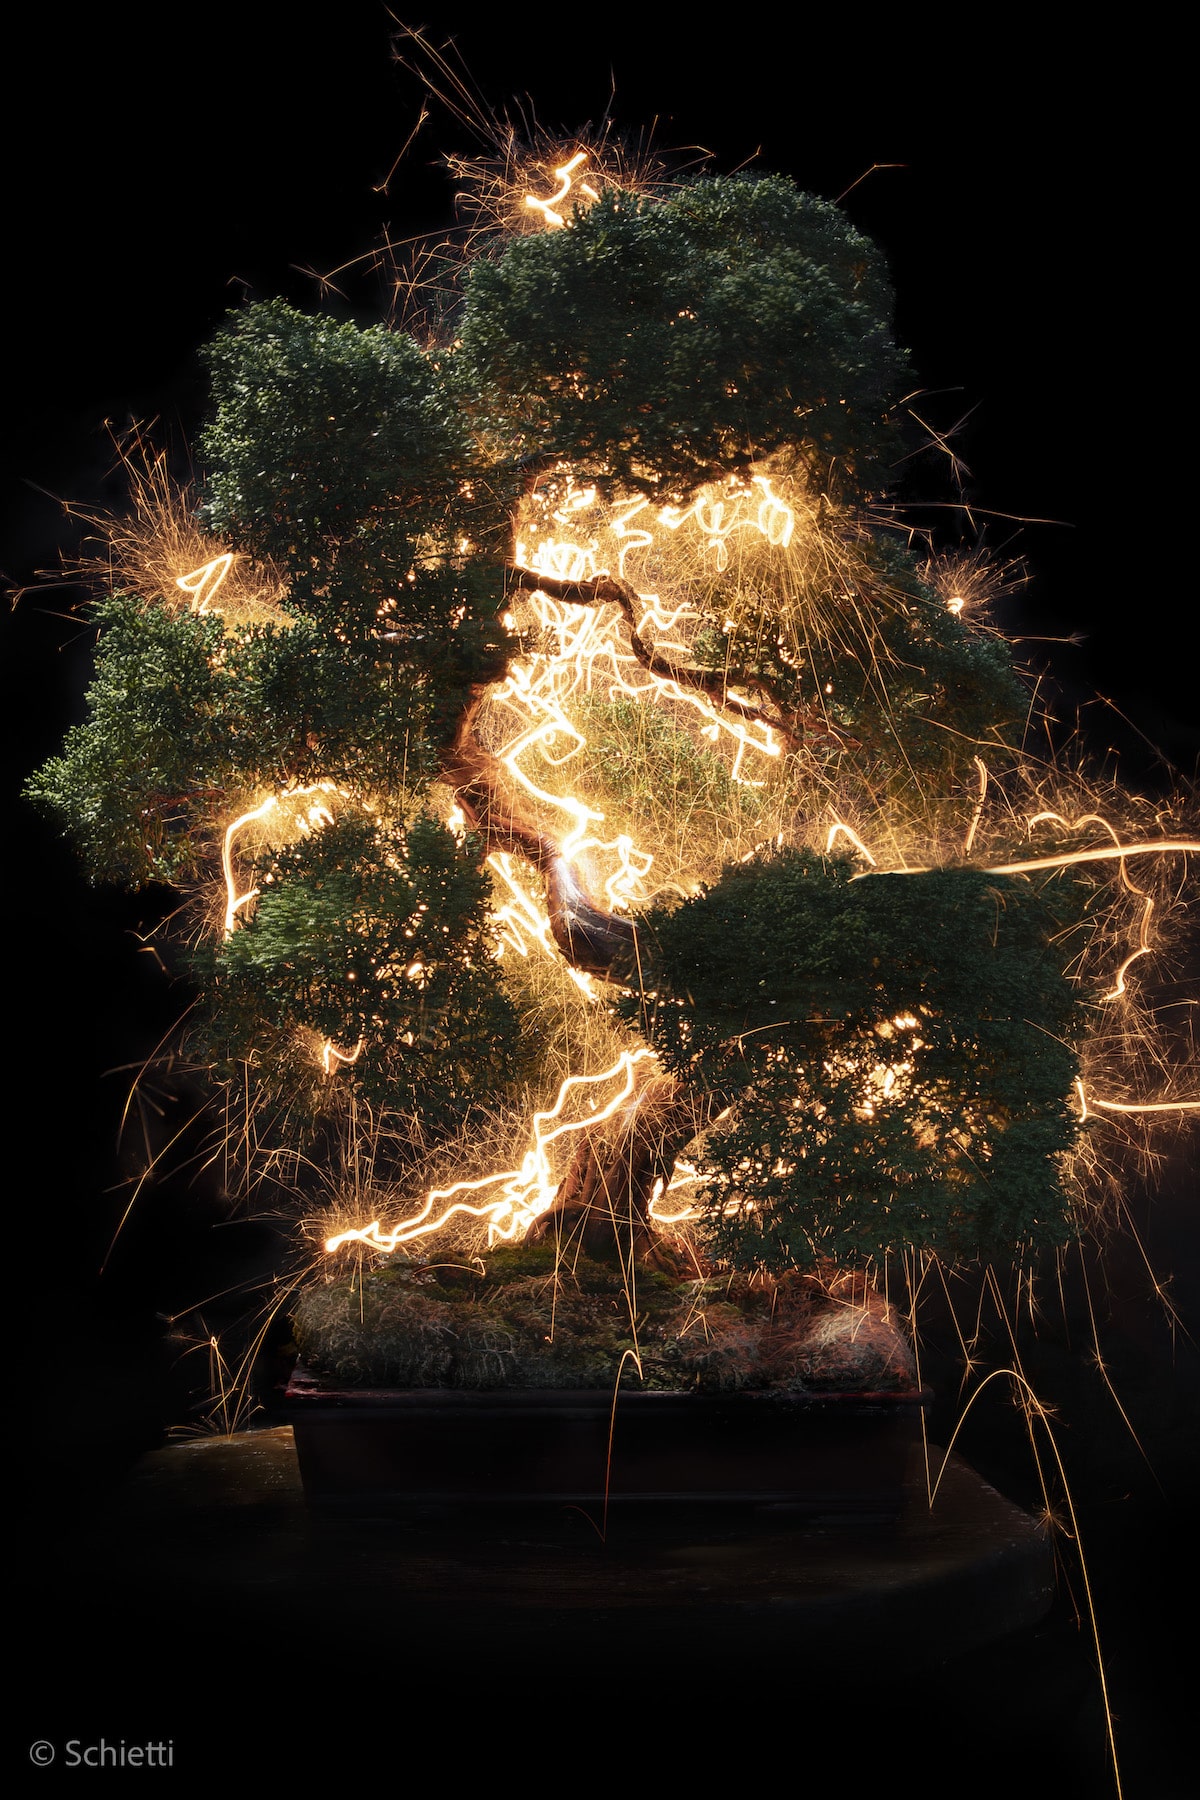 Long Exposure Photography of Bonsai Trees by Vitor Schietti